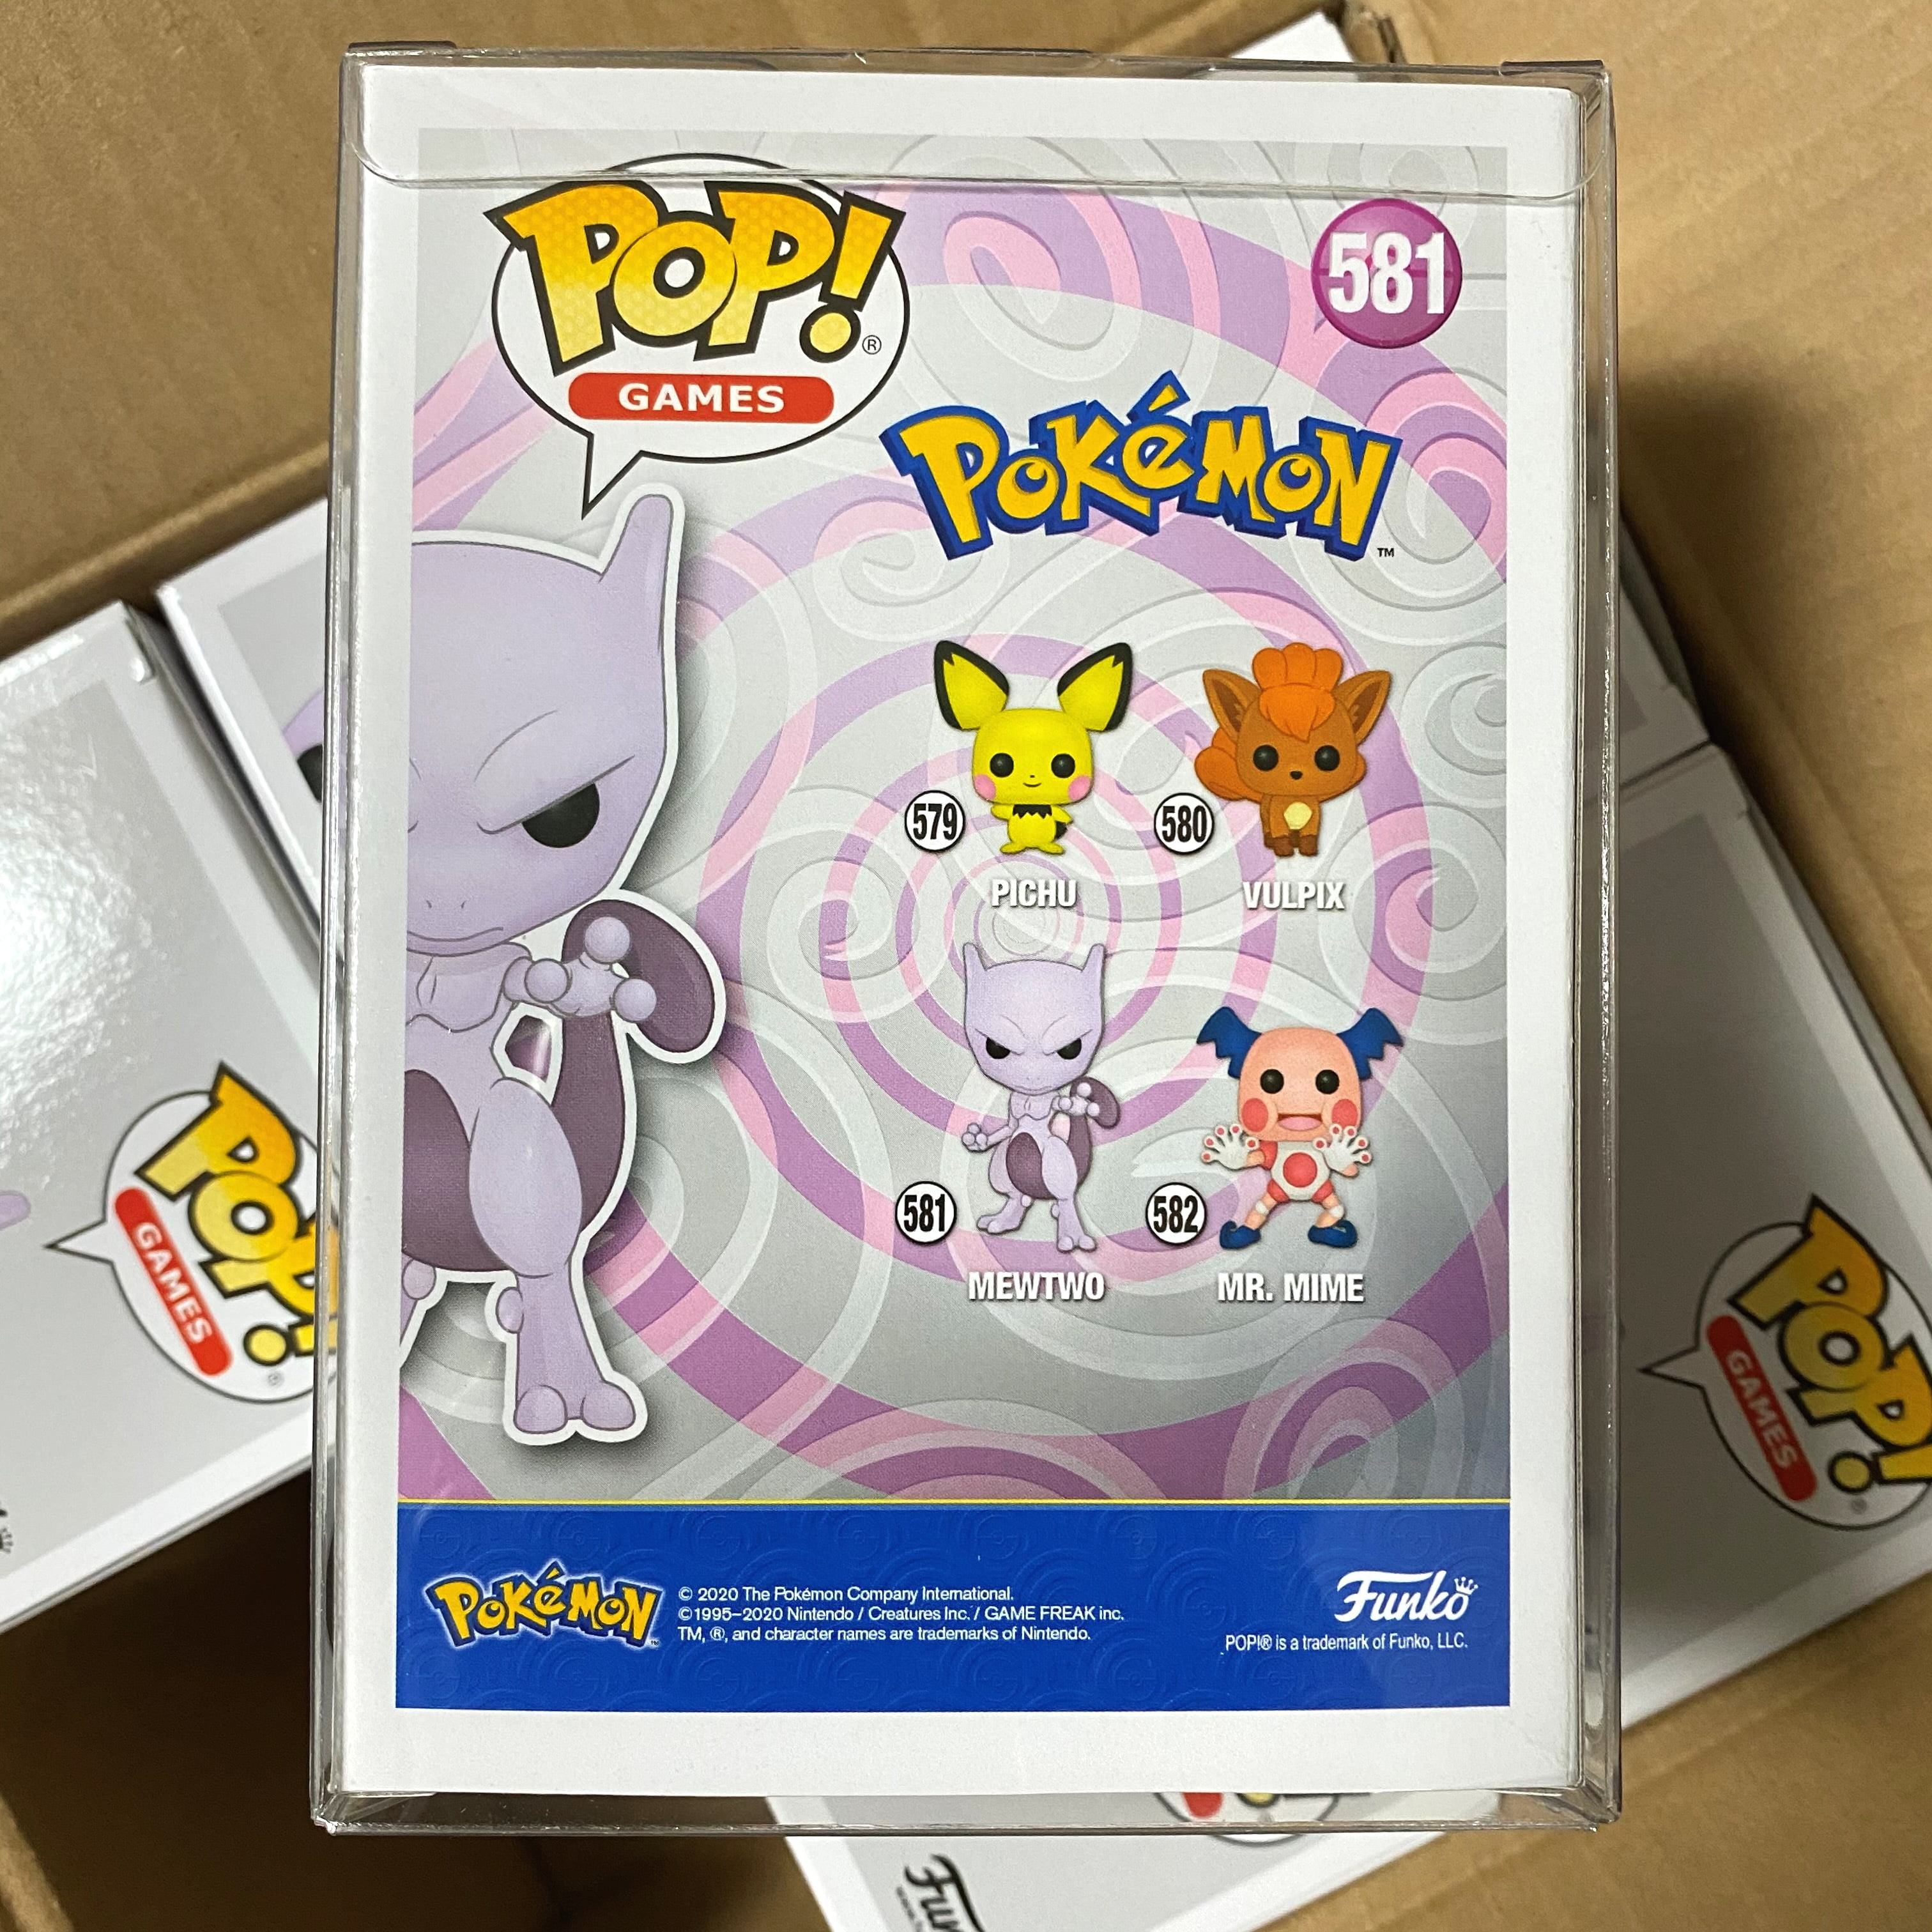 Funko Pop Games - Pokemon Mewtwo 581 (Flocked) (2020 Summer Convention  Limited Edition Exclusive) - Arena Funkos